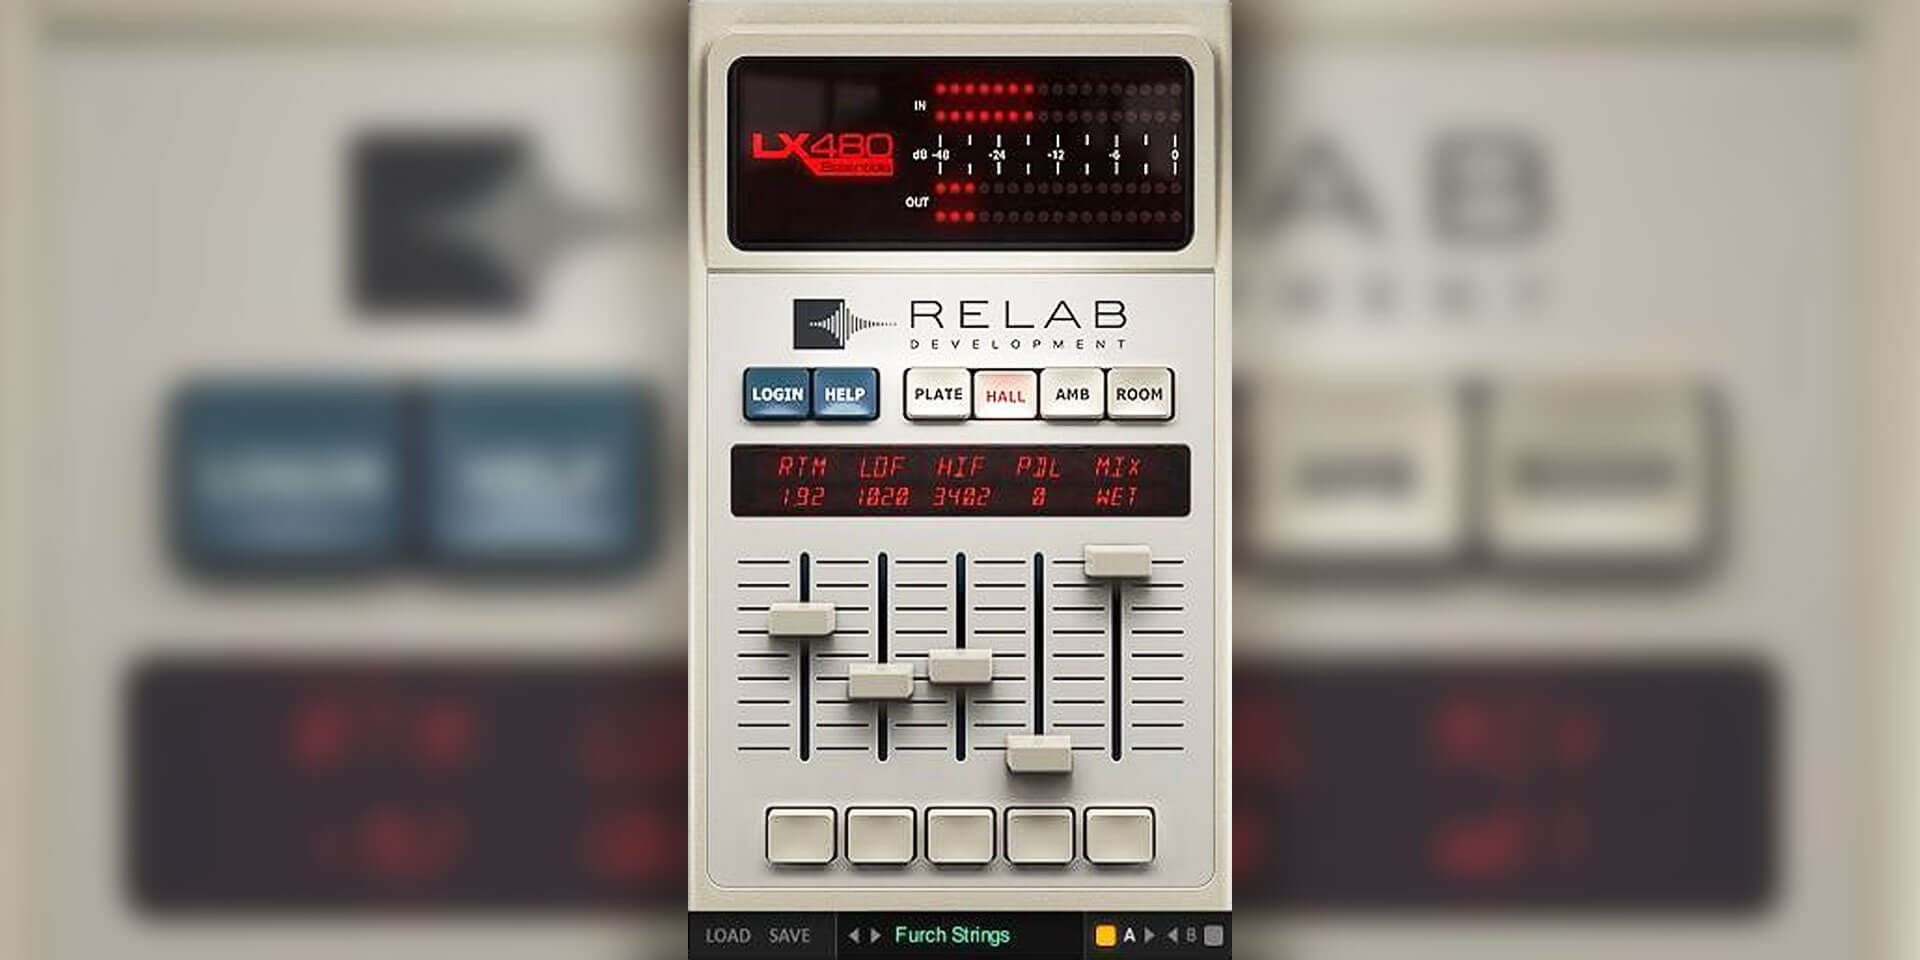 Relab LX480 Complete review